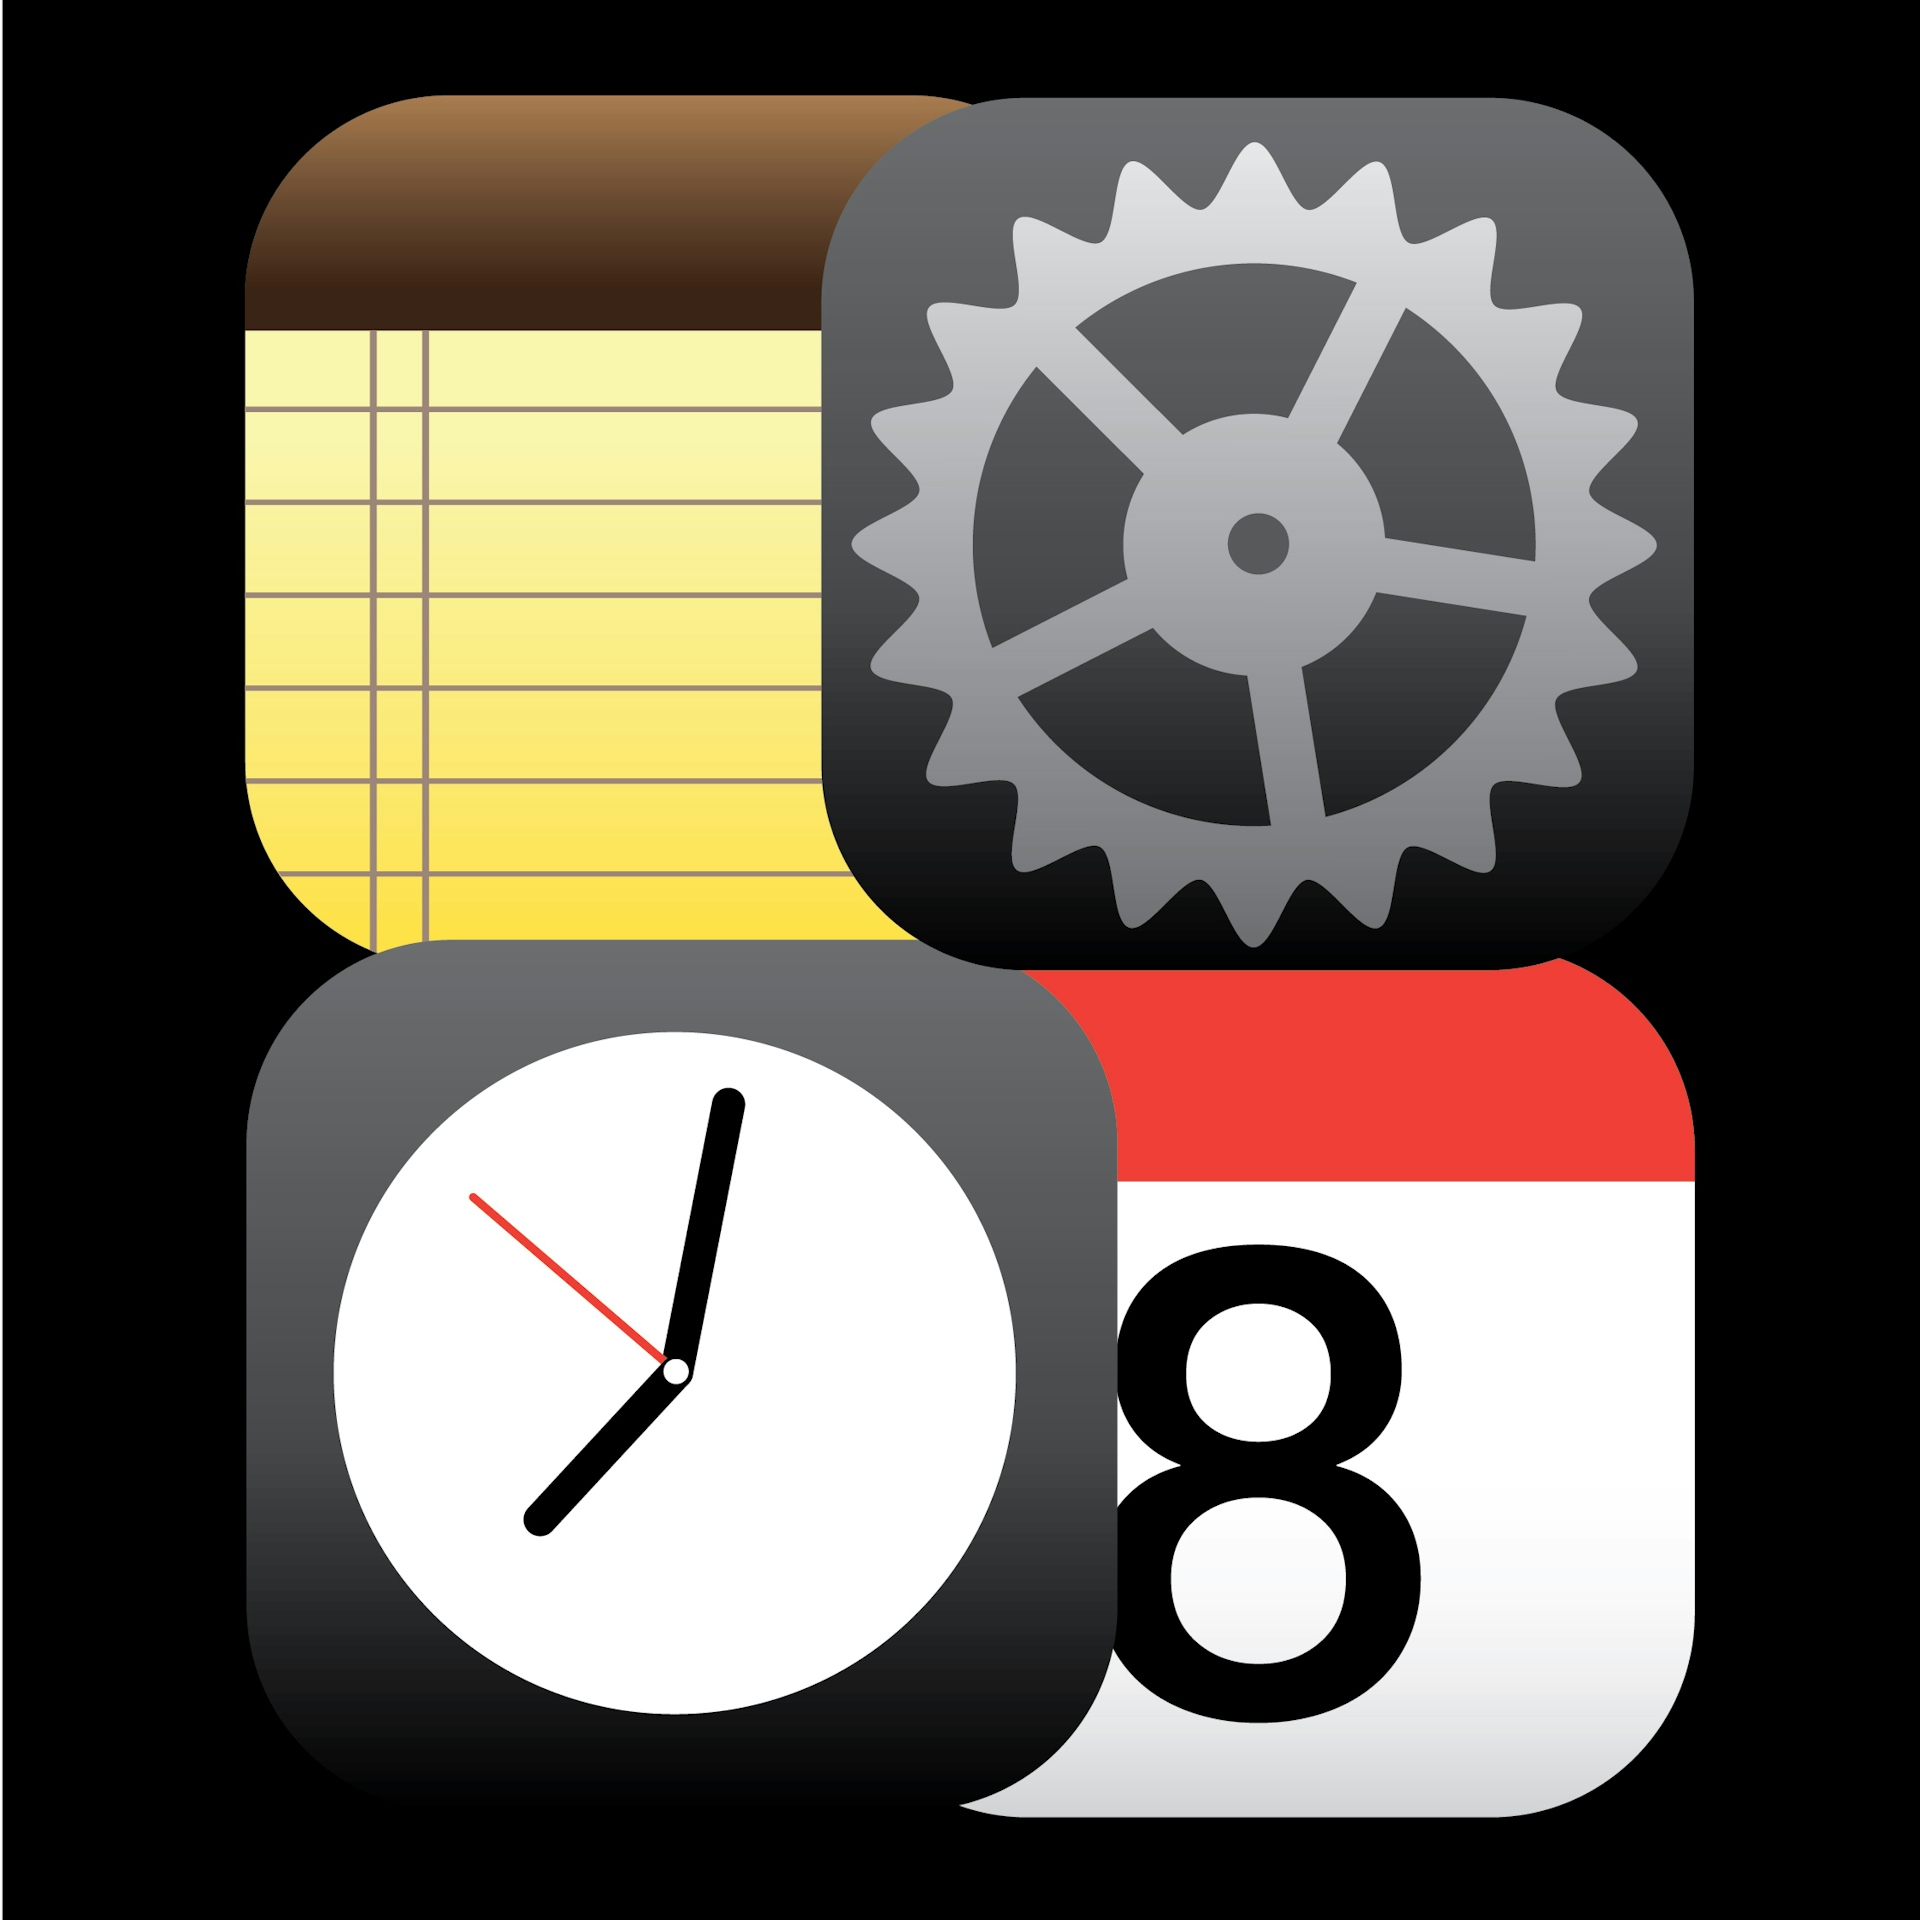 Illustrations of the Notes, Settings, Clock, and Calendar apps on early iPhones